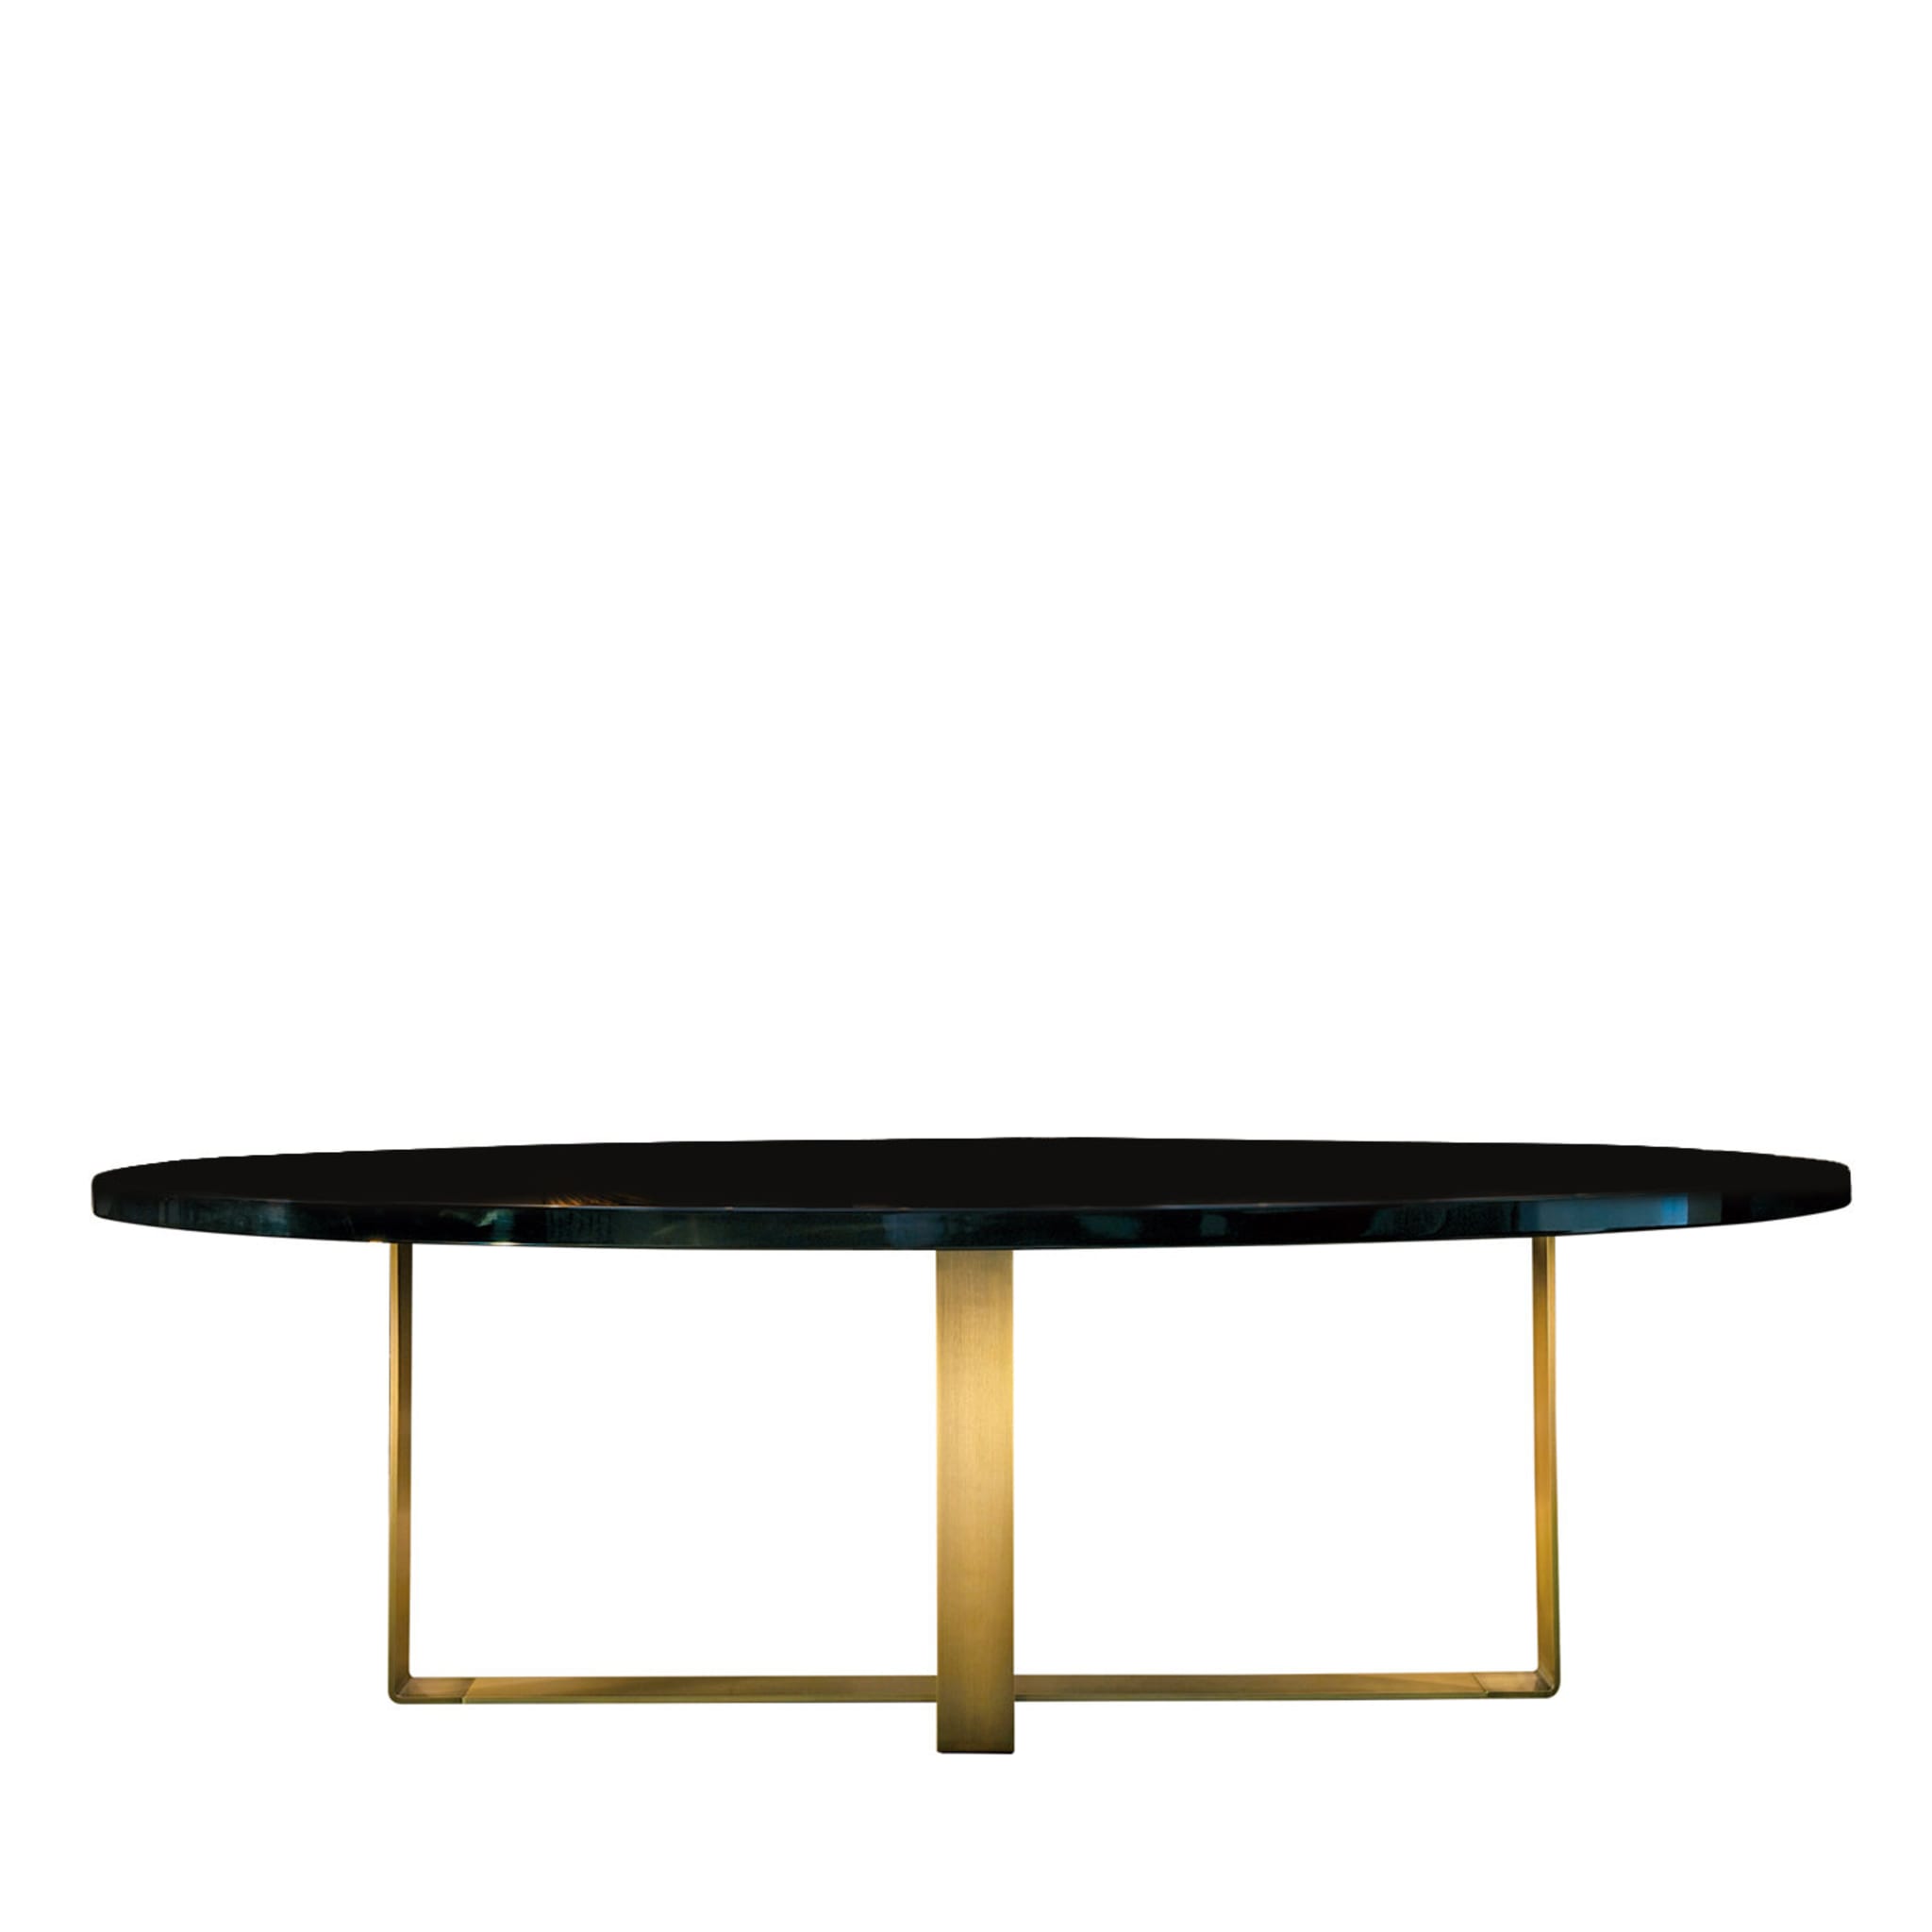 Pierre Oval Dining Table - Main view